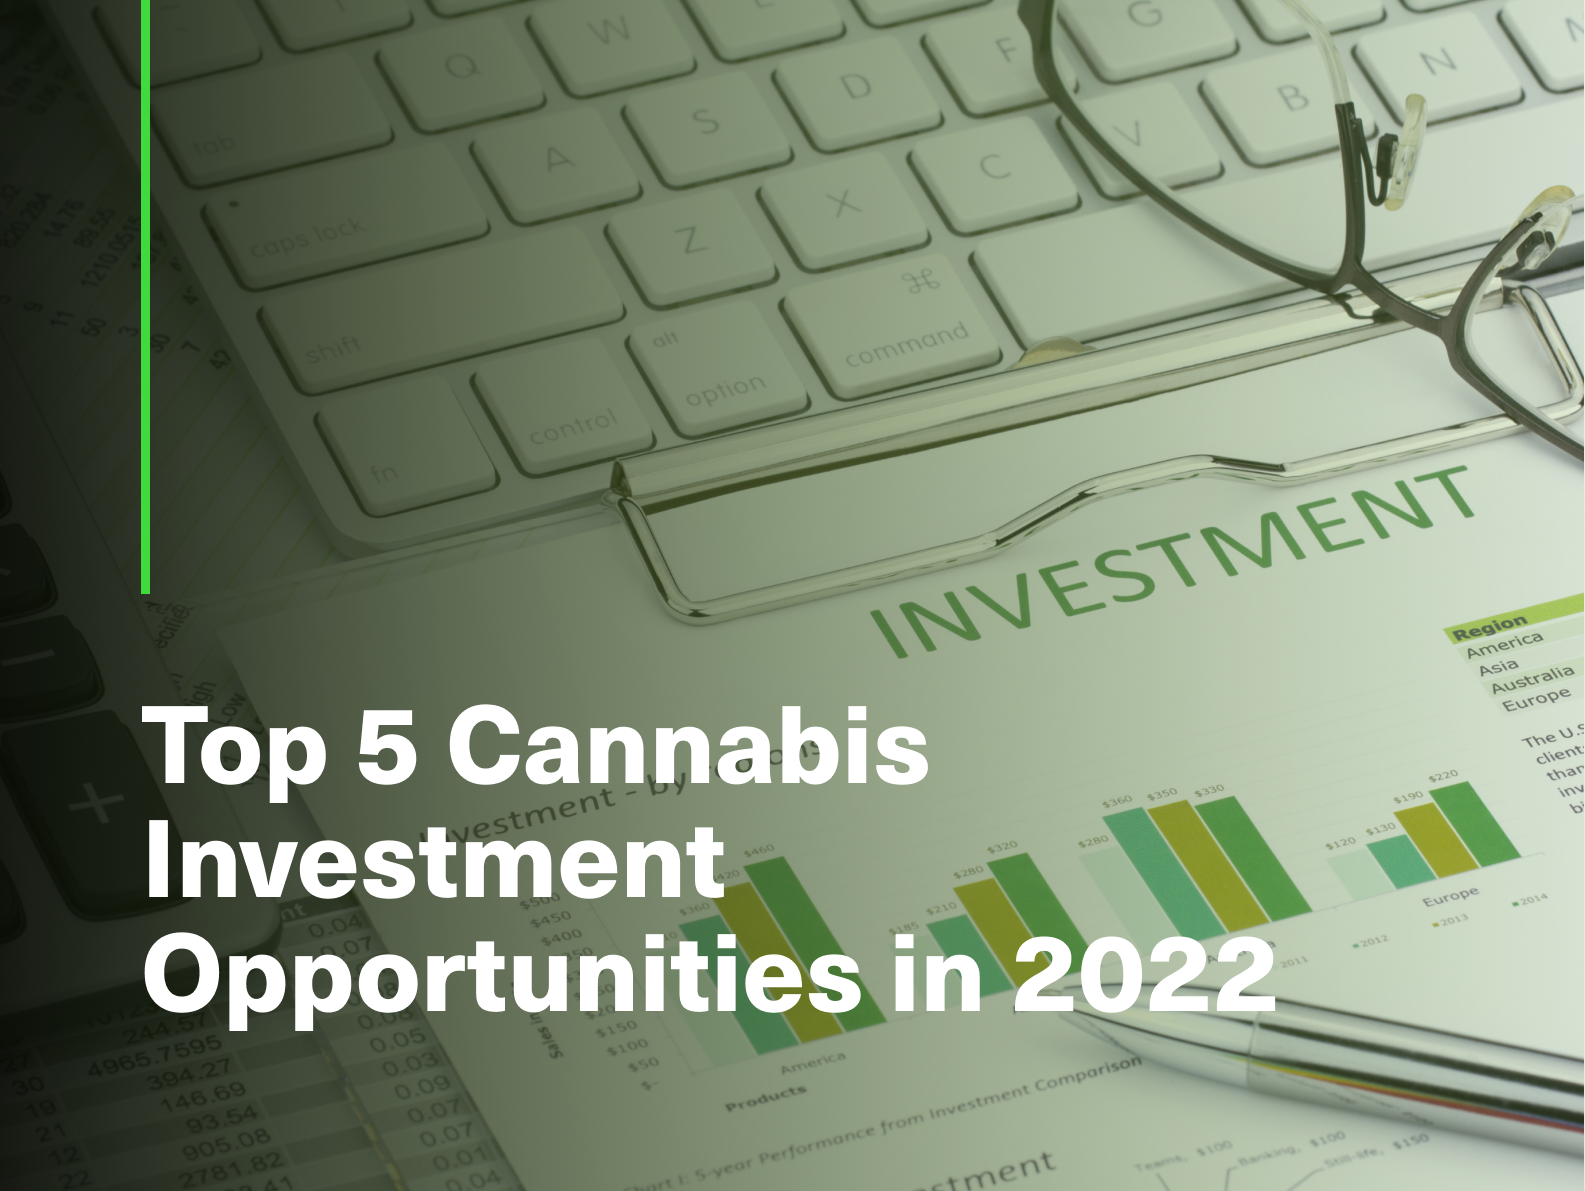 Top 5 Cannabis Investment Opportunities in 2022 - Begreenlegal